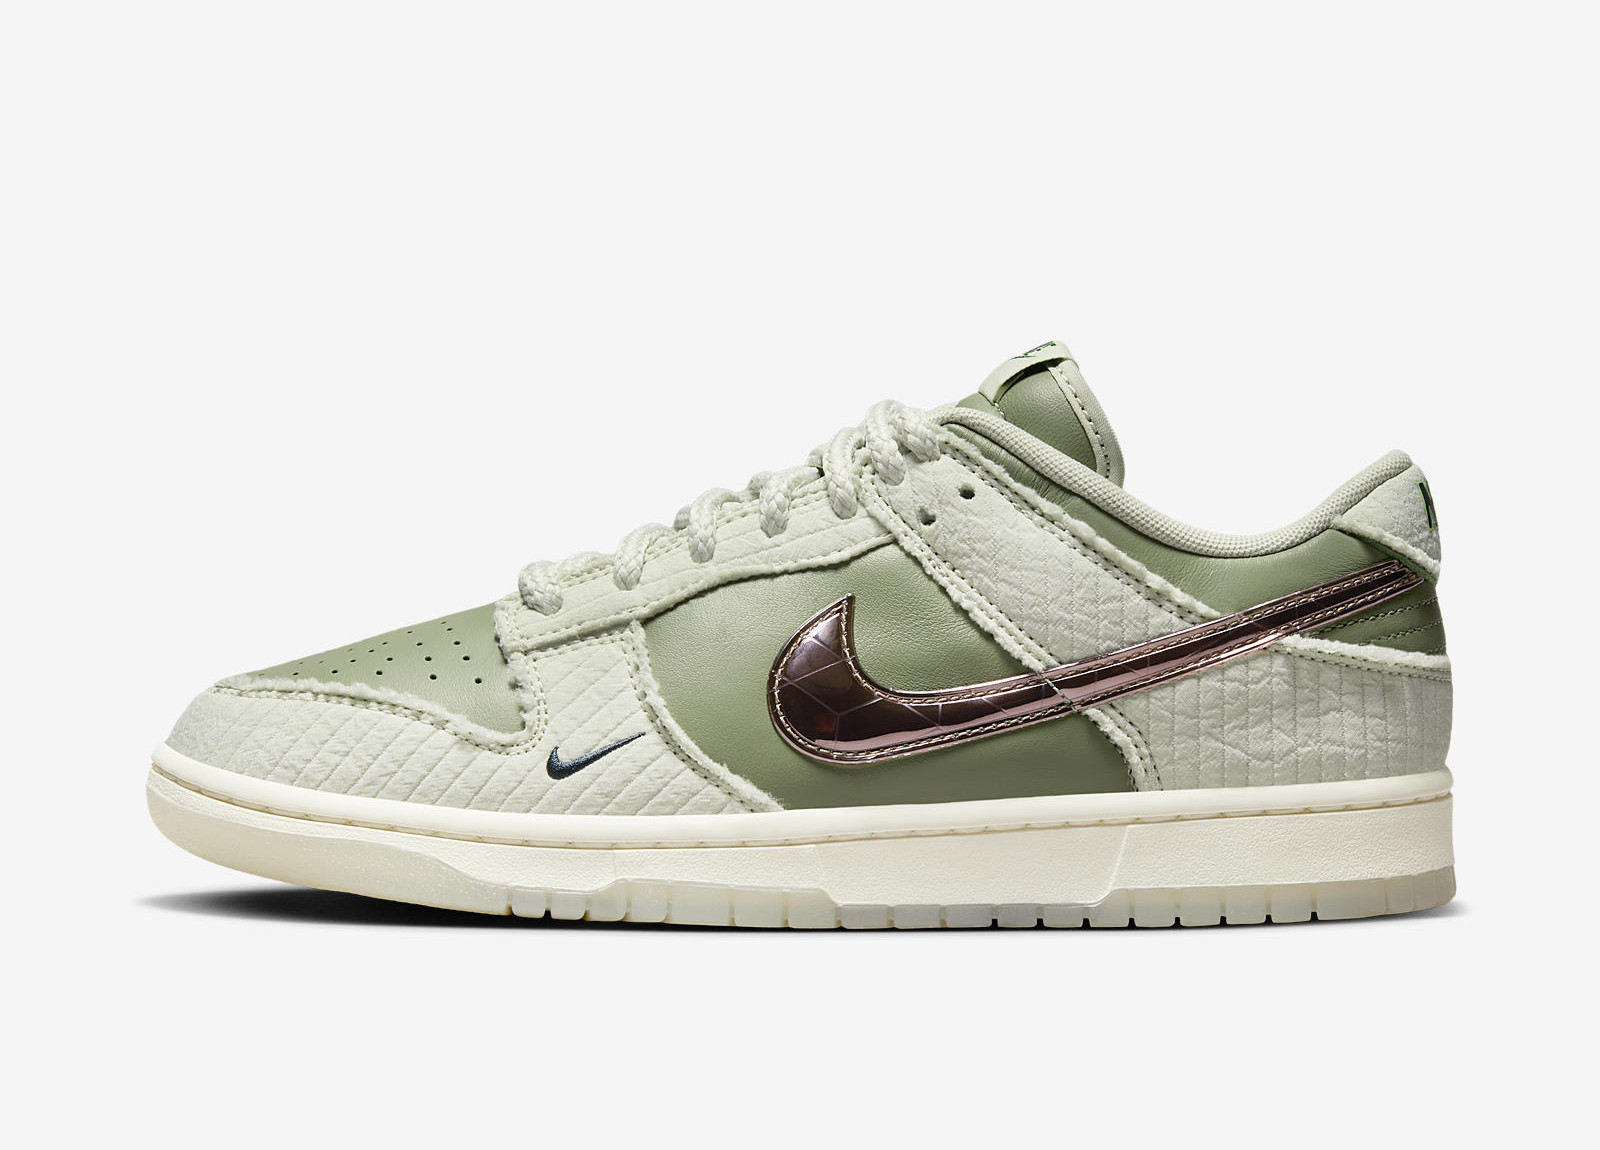 Kyler Murray x Nike
Dunk Low
« Be 1 of One »